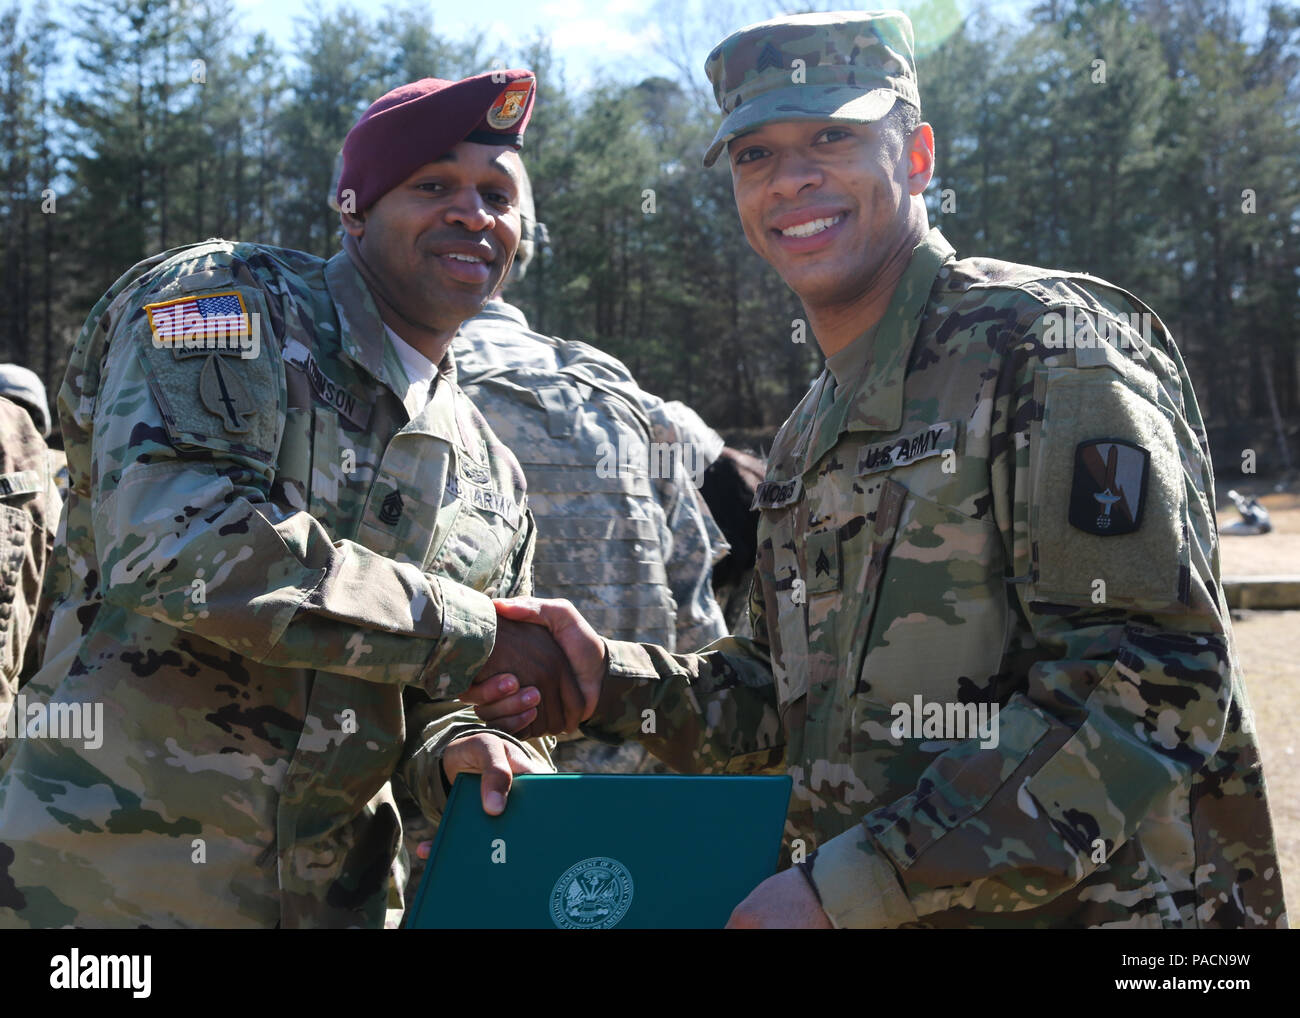 U.S. Army 1st. Sgt. Endesha Johnson, assigned to 55th Signal Company (Combat Camera), congratulates Sgt. Samuel Nobles following his promotion at Fort George G. Meade, Md., March 2, 2016. The promotion from Specialist to Sergeant marks the responsibility instilled into the new noncommissioned officer. (U.S. Army photo by Spc. Alyssa Madero/Released) Stock Photo